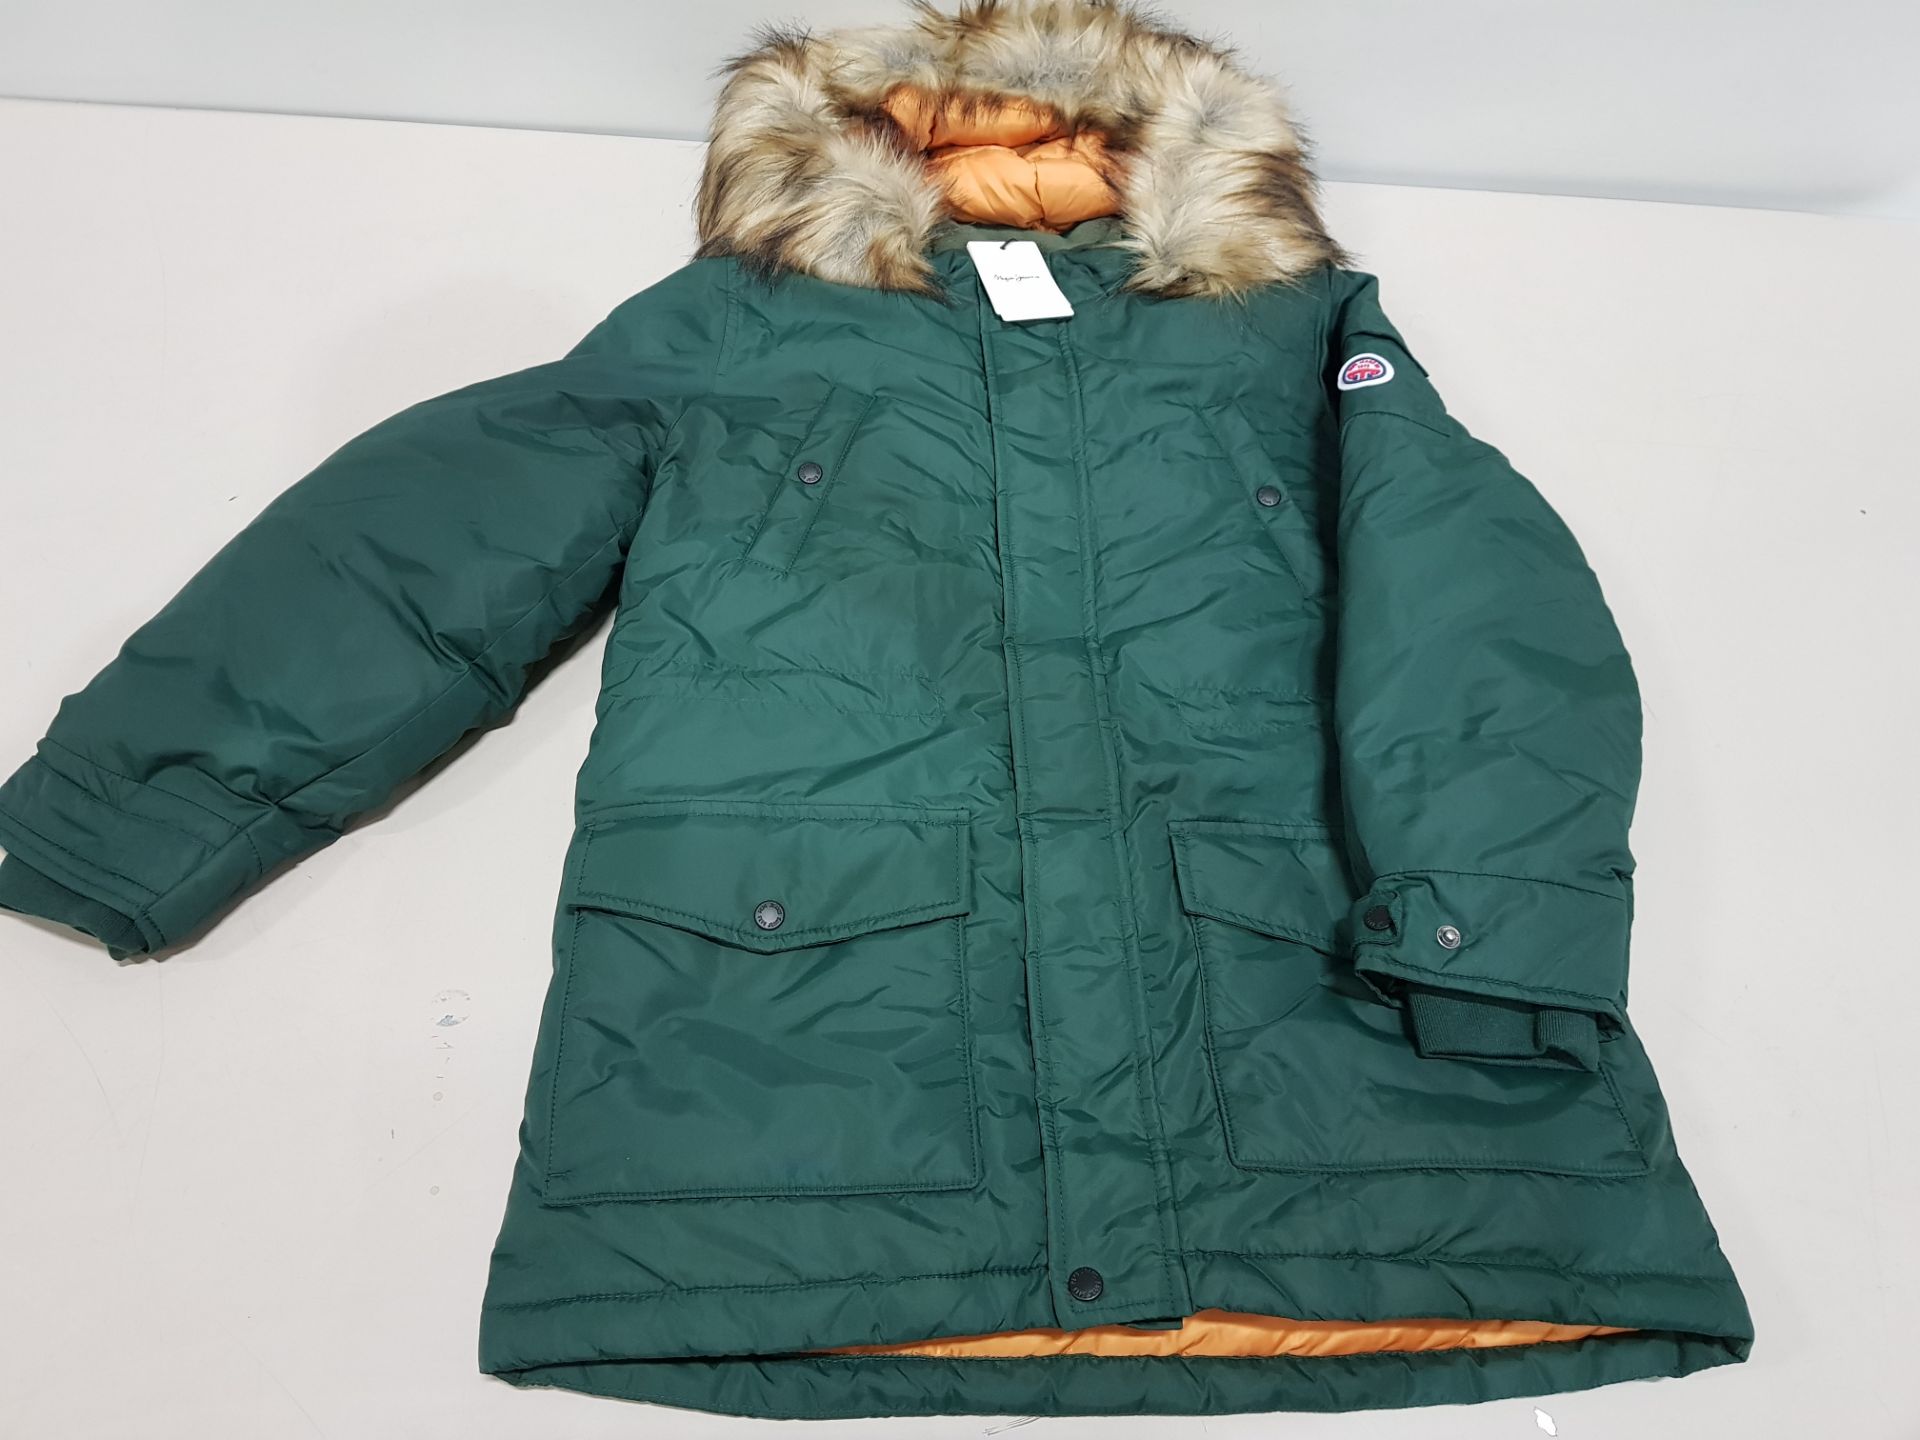 7 X BRAND NEW KIDS PEPE JEANS RIKK JACKETS WITH FAUX FUR HOOD IN GREEN VARIOUS SIZES